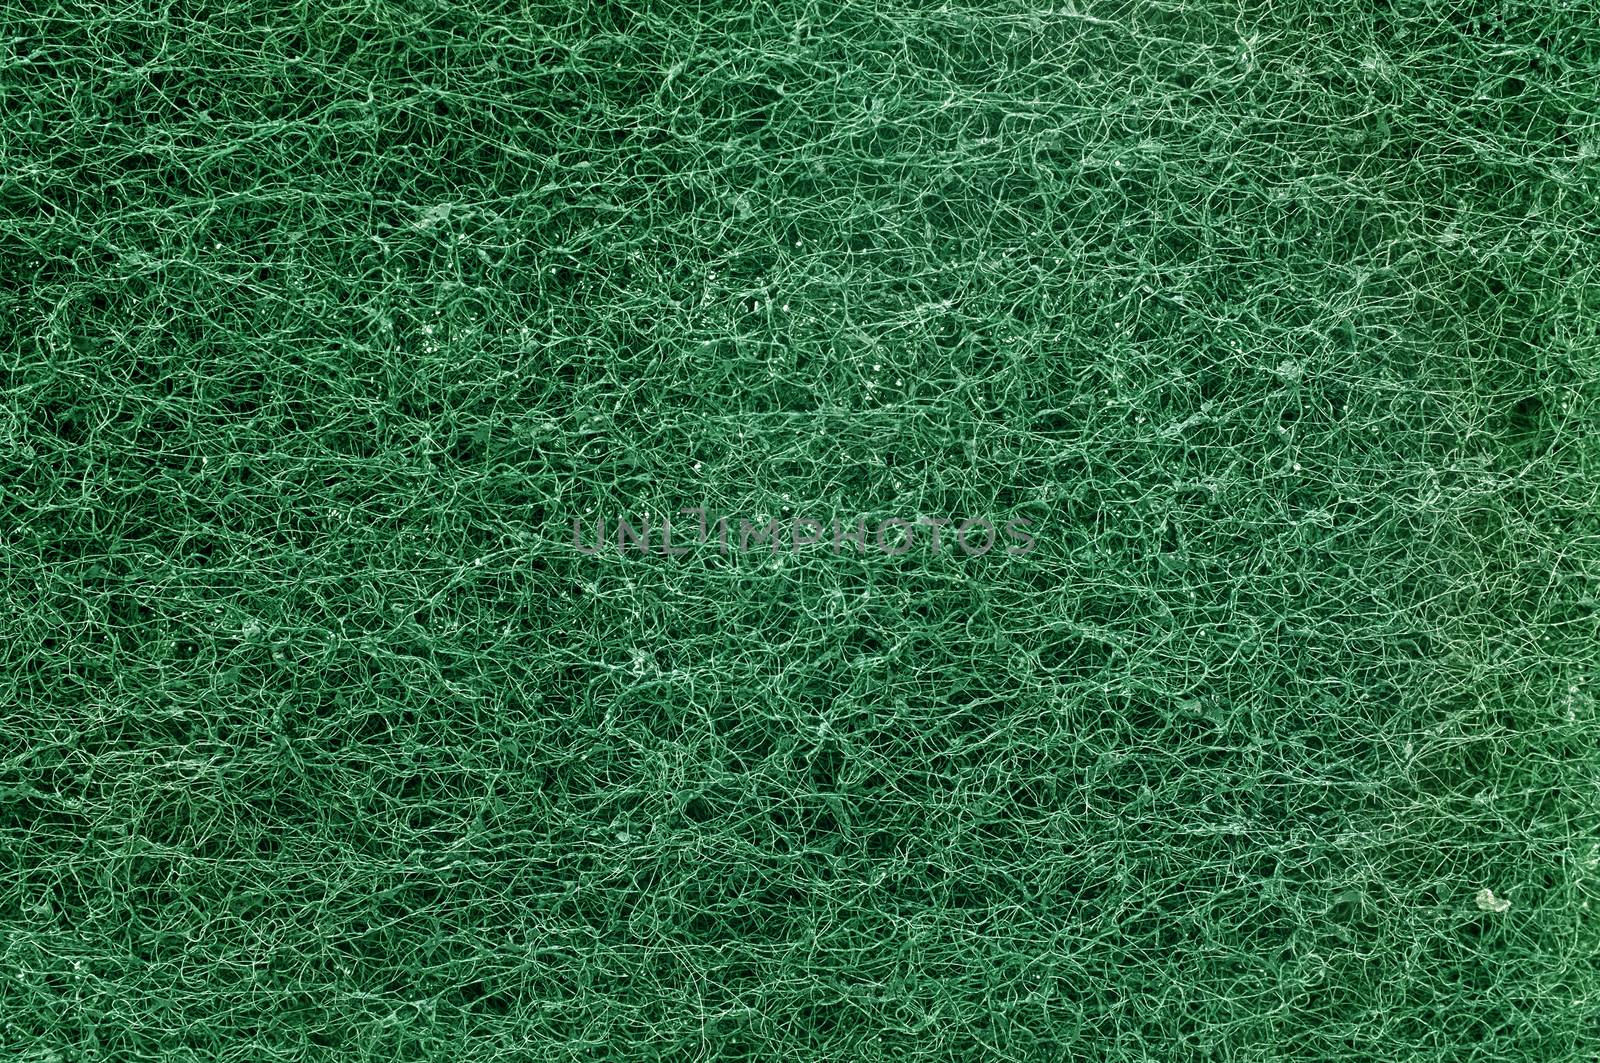 Surface texture of clean scrubber in green color for background or wallpaper by Hepjam